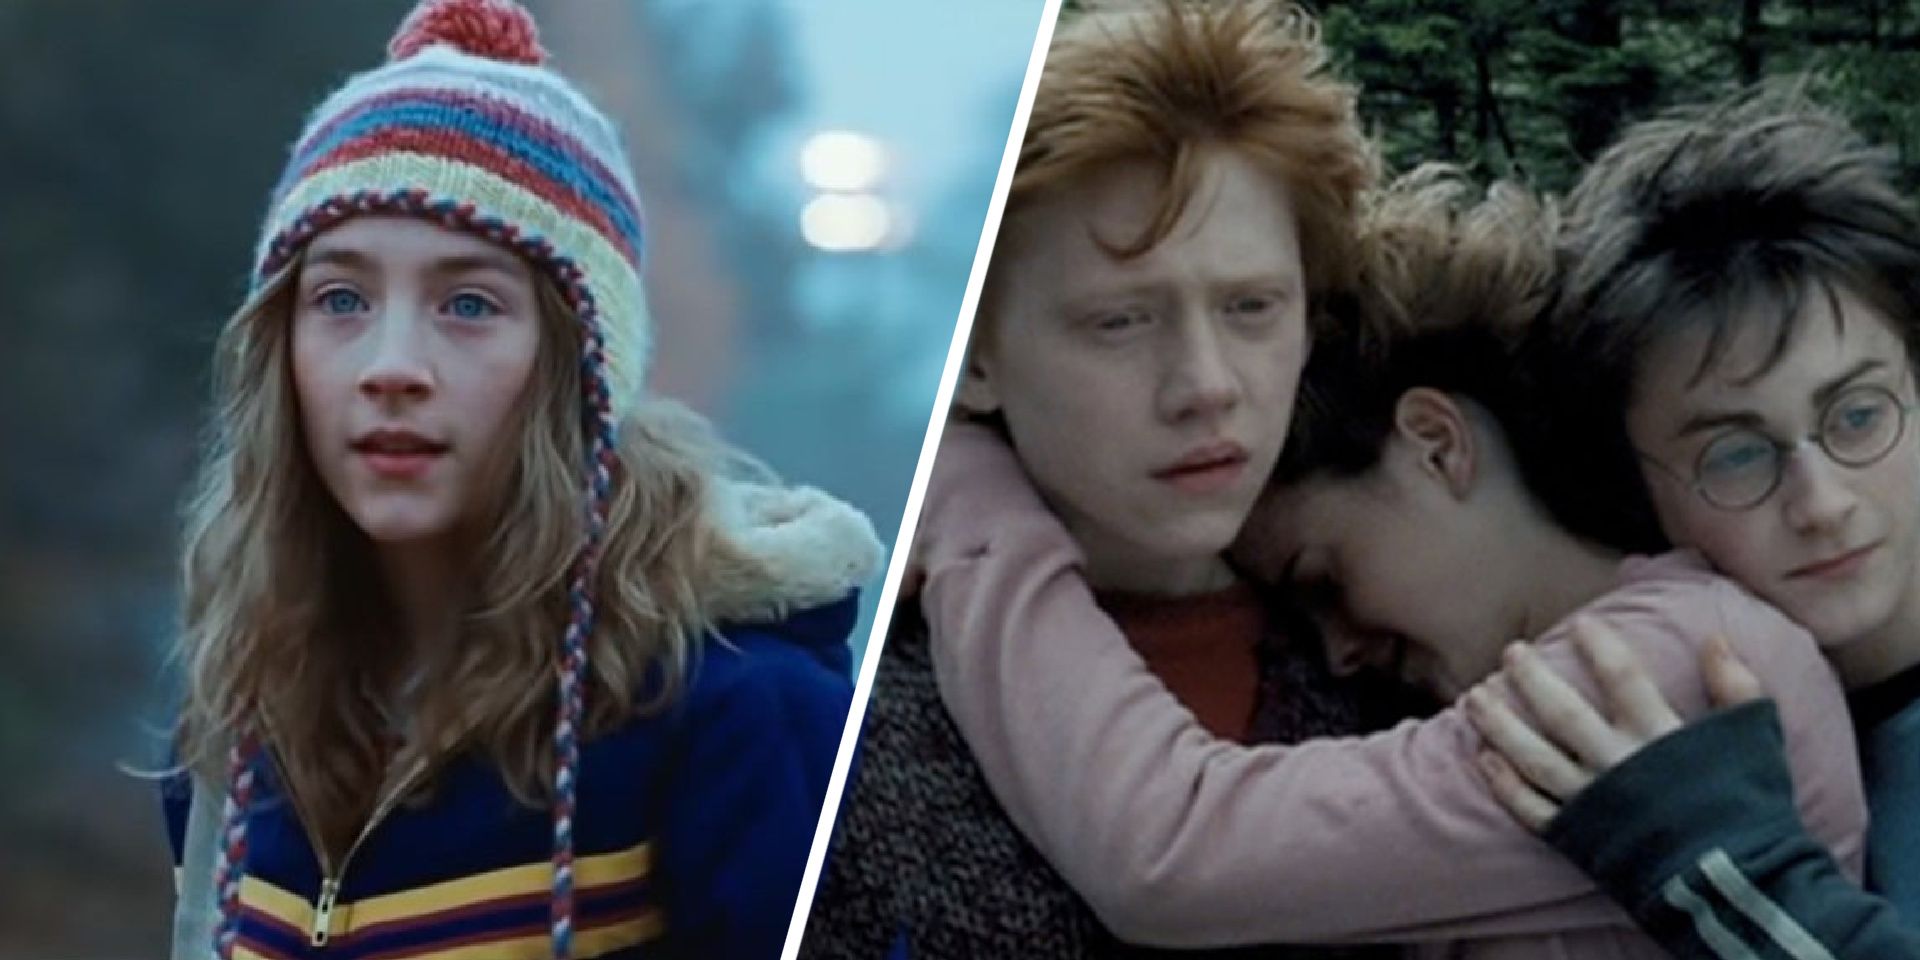 Susie from the lovely bones stares. Harry, Ron and Hermione hug in the Harry Potter series.